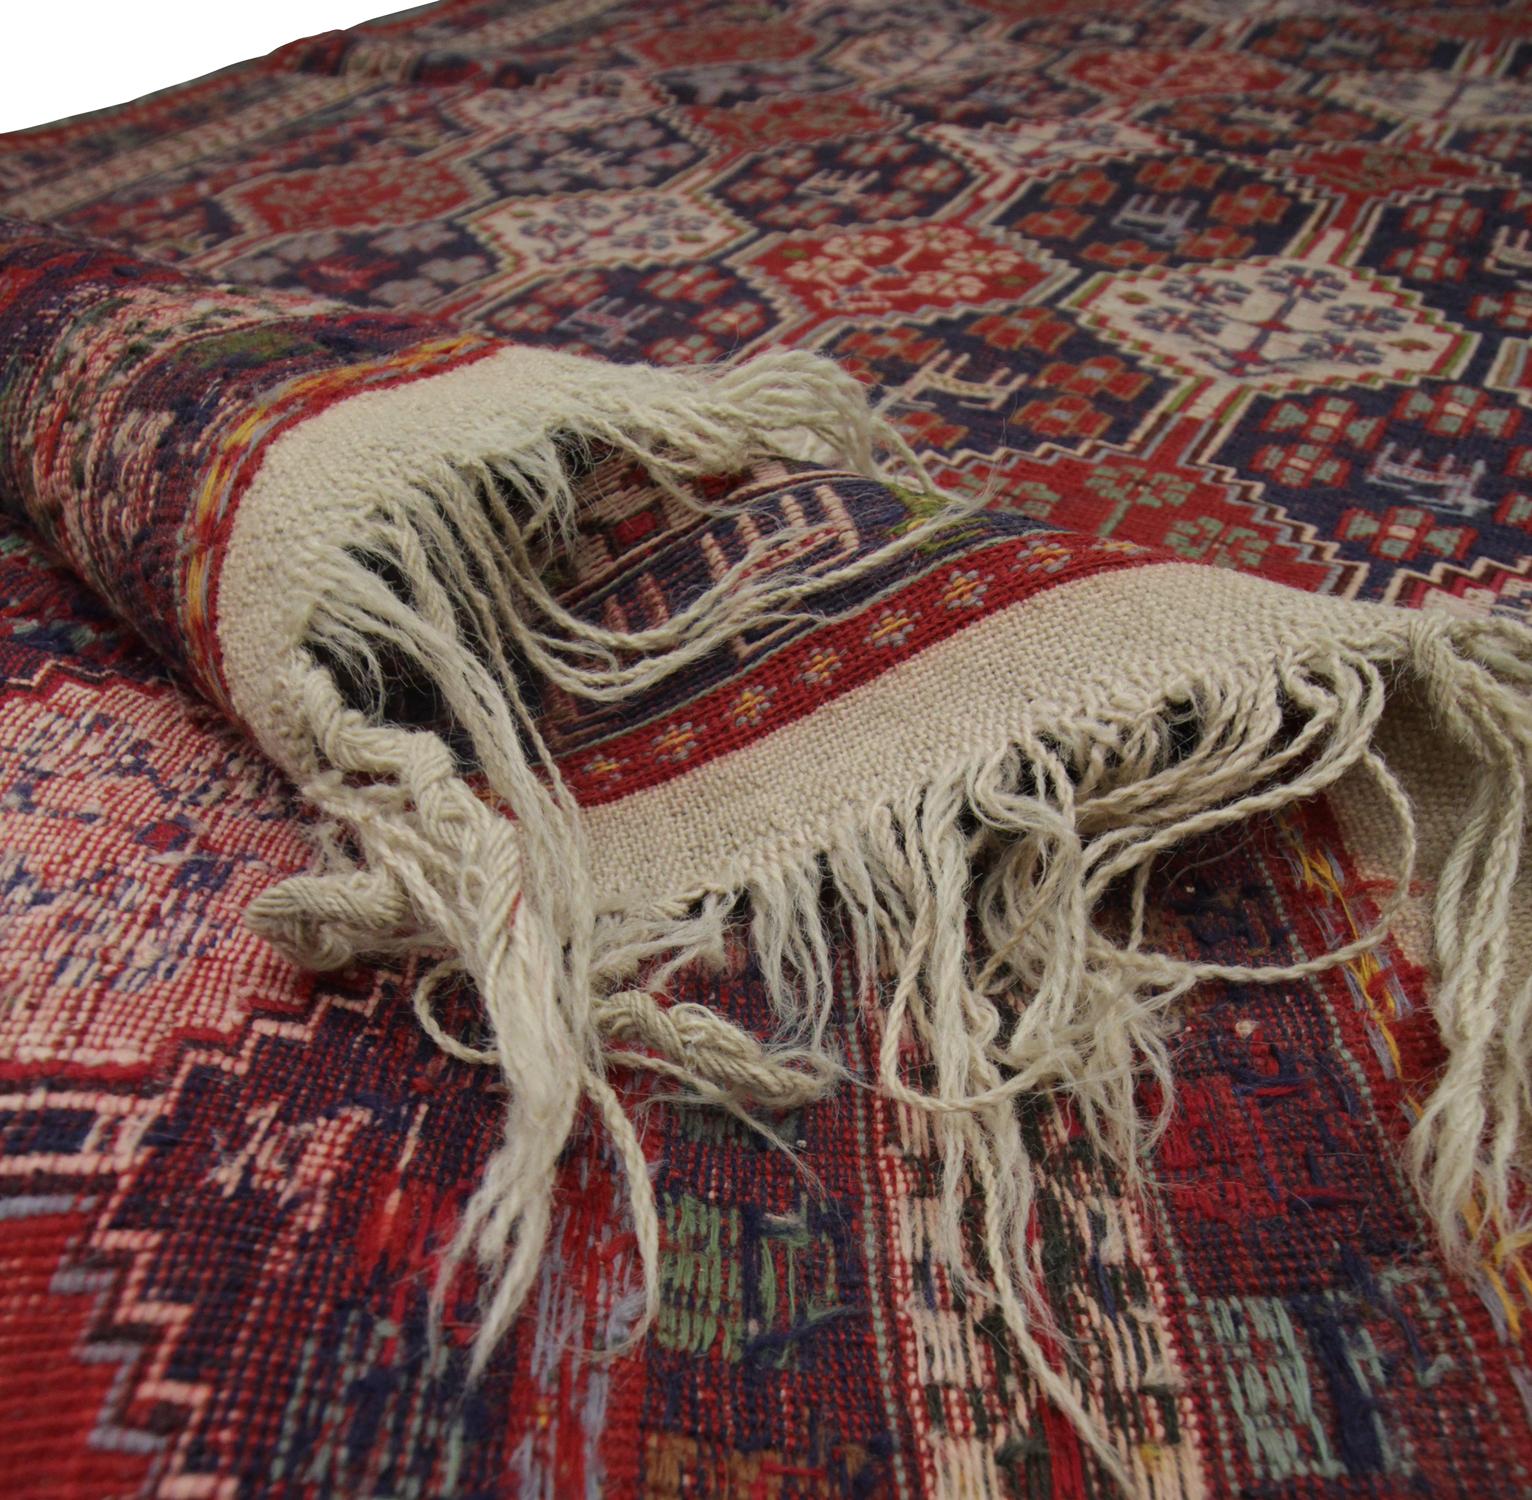 Handwoven Kilims Oriental Area Rug, Traditional Sumakh Kilim Red Wool Carpet In Excellent Condition For Sale In Hampshire, GB